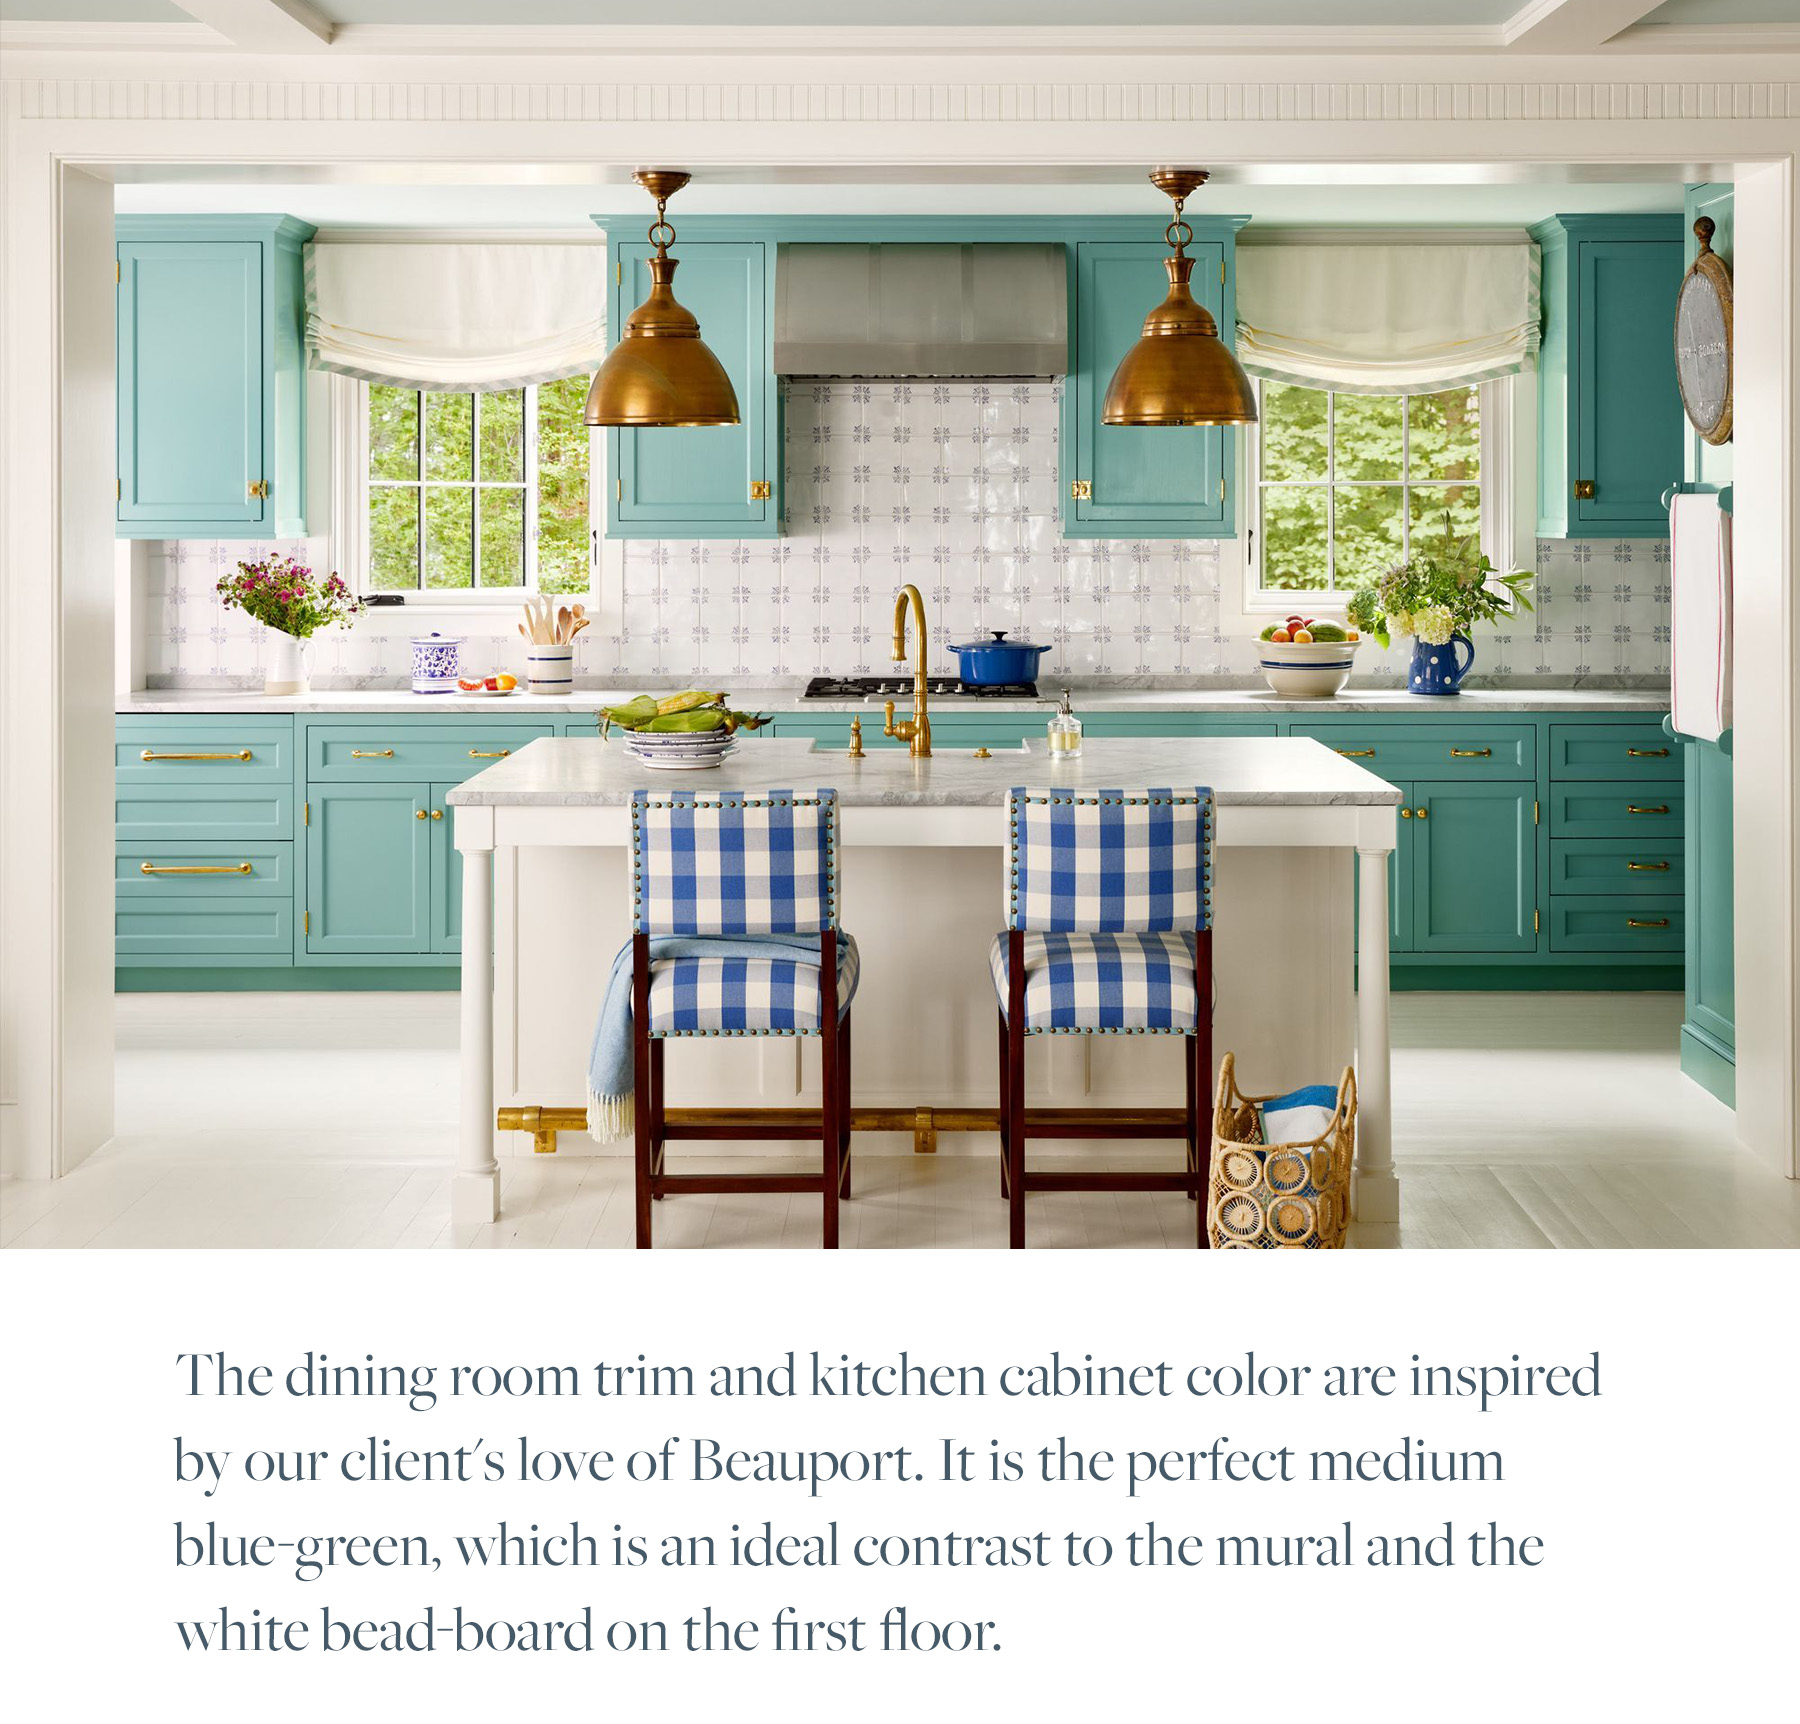 The dining room trim and kitchen cabinet color are inspired by our client's love of Beauport. It is the perfect medium blue-green, which is an ideal contrast to the mural and the white bead-board on the first floor. 